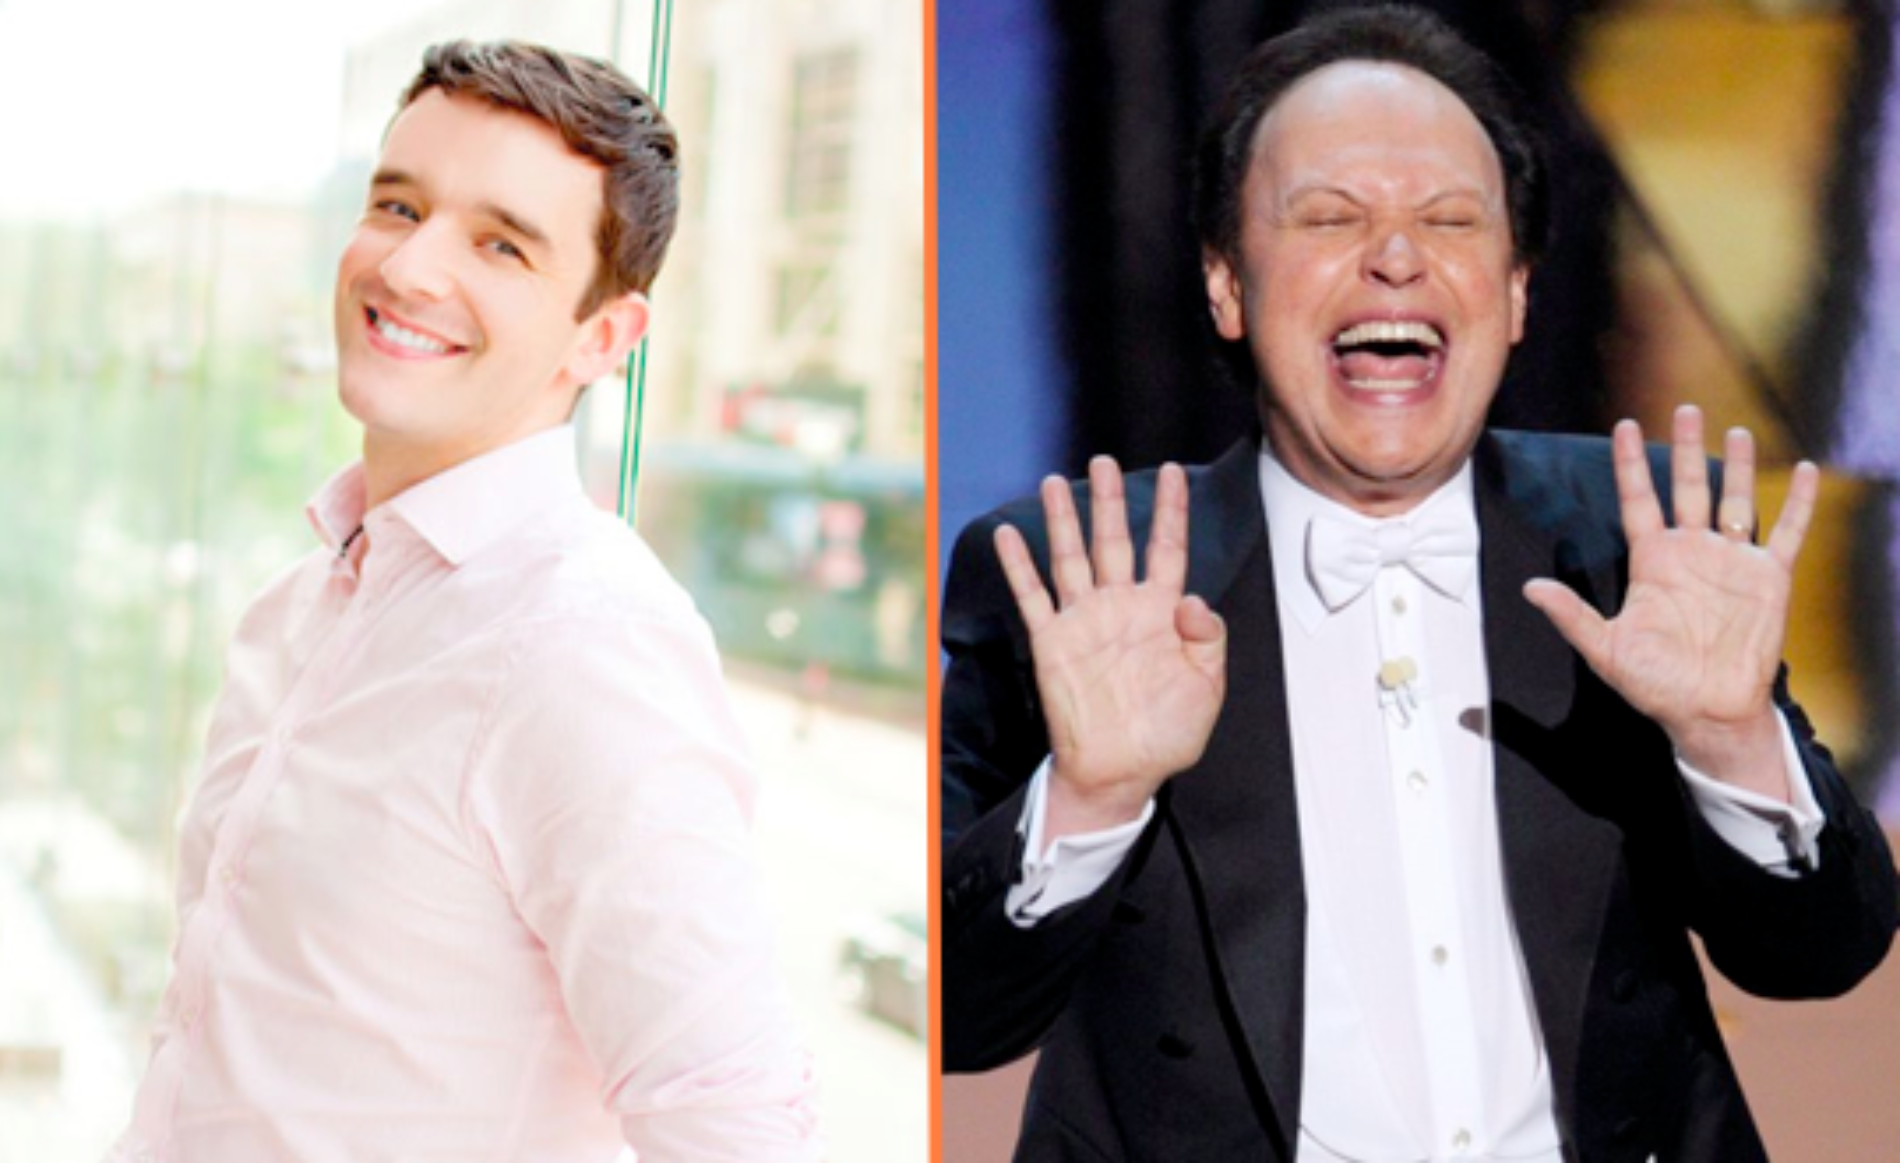 ‘If You Don’t Like Watching Gay Sex On TV, Change The Channel.’ Michael Urie To Billy Crystal